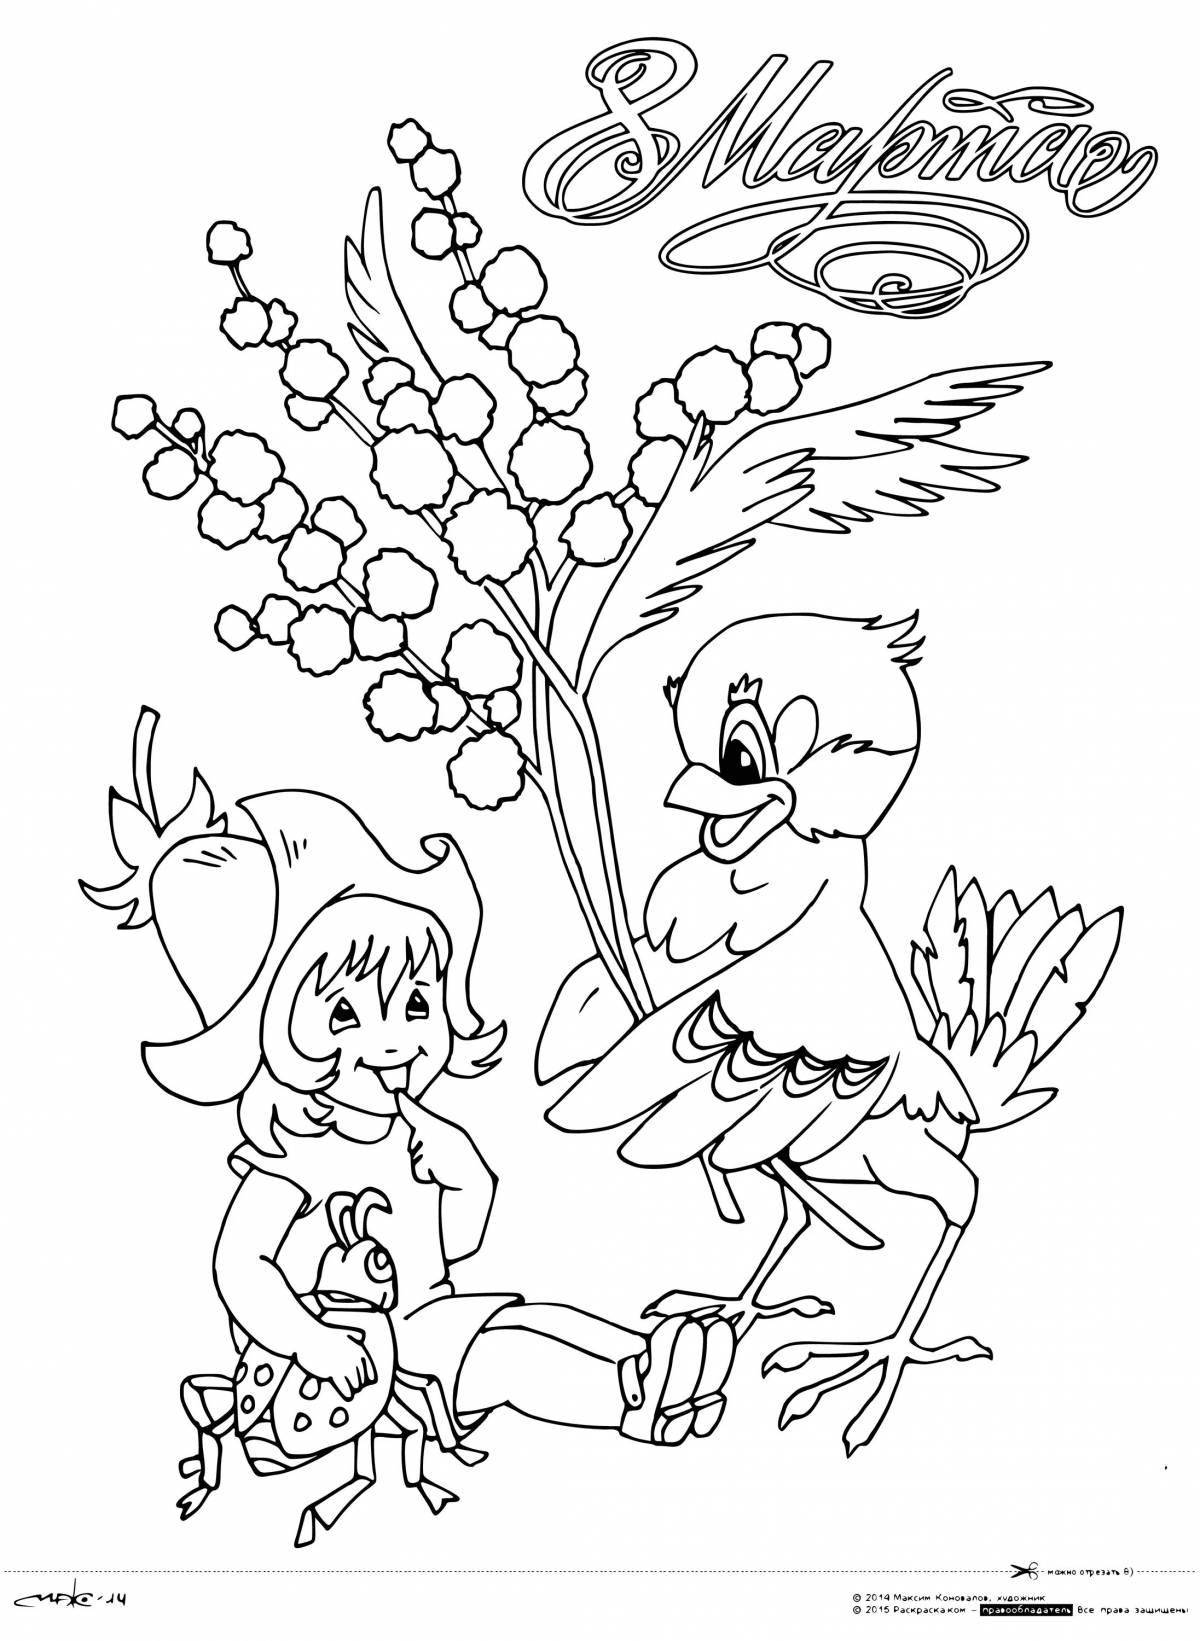 Glowing March coloring page